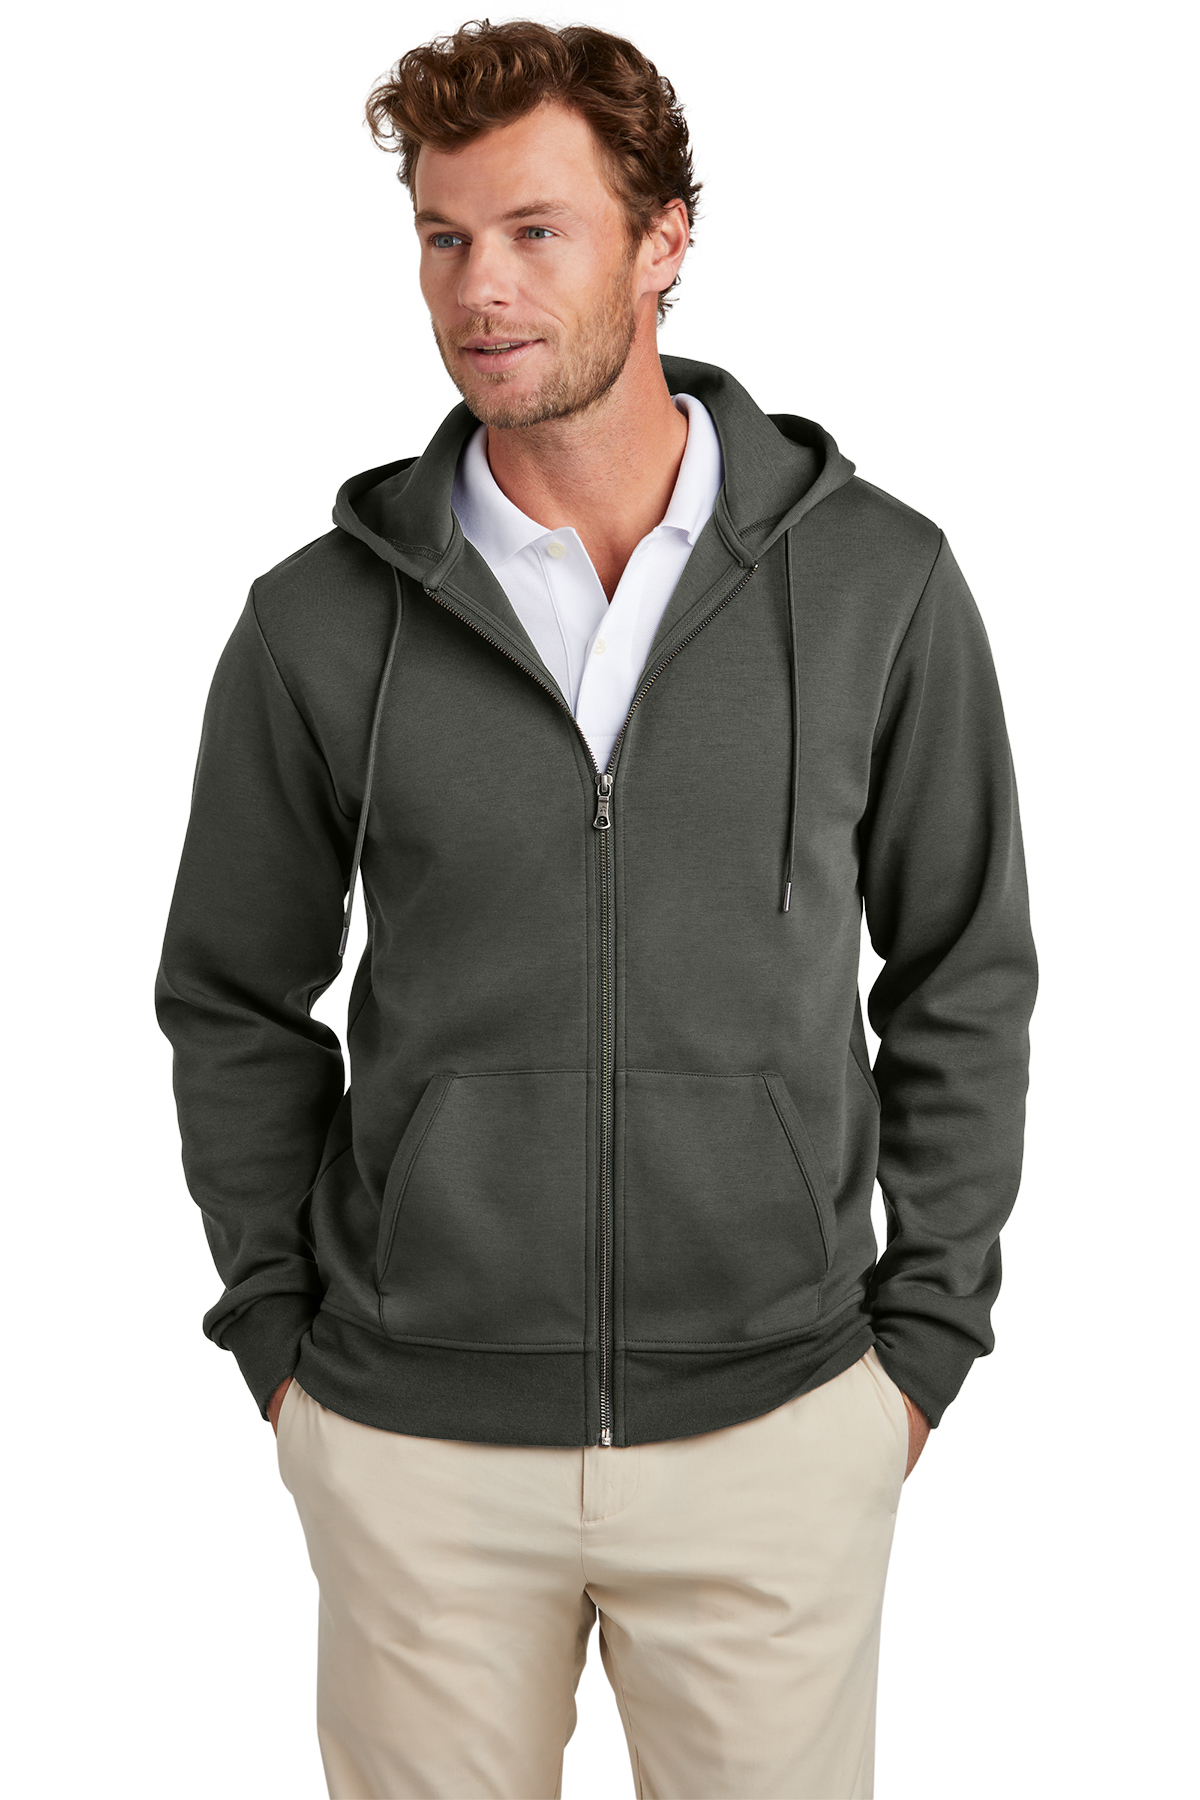 Brooks Brothers Double-Knit Full-Zip Hoodie | Product | Company Casuals